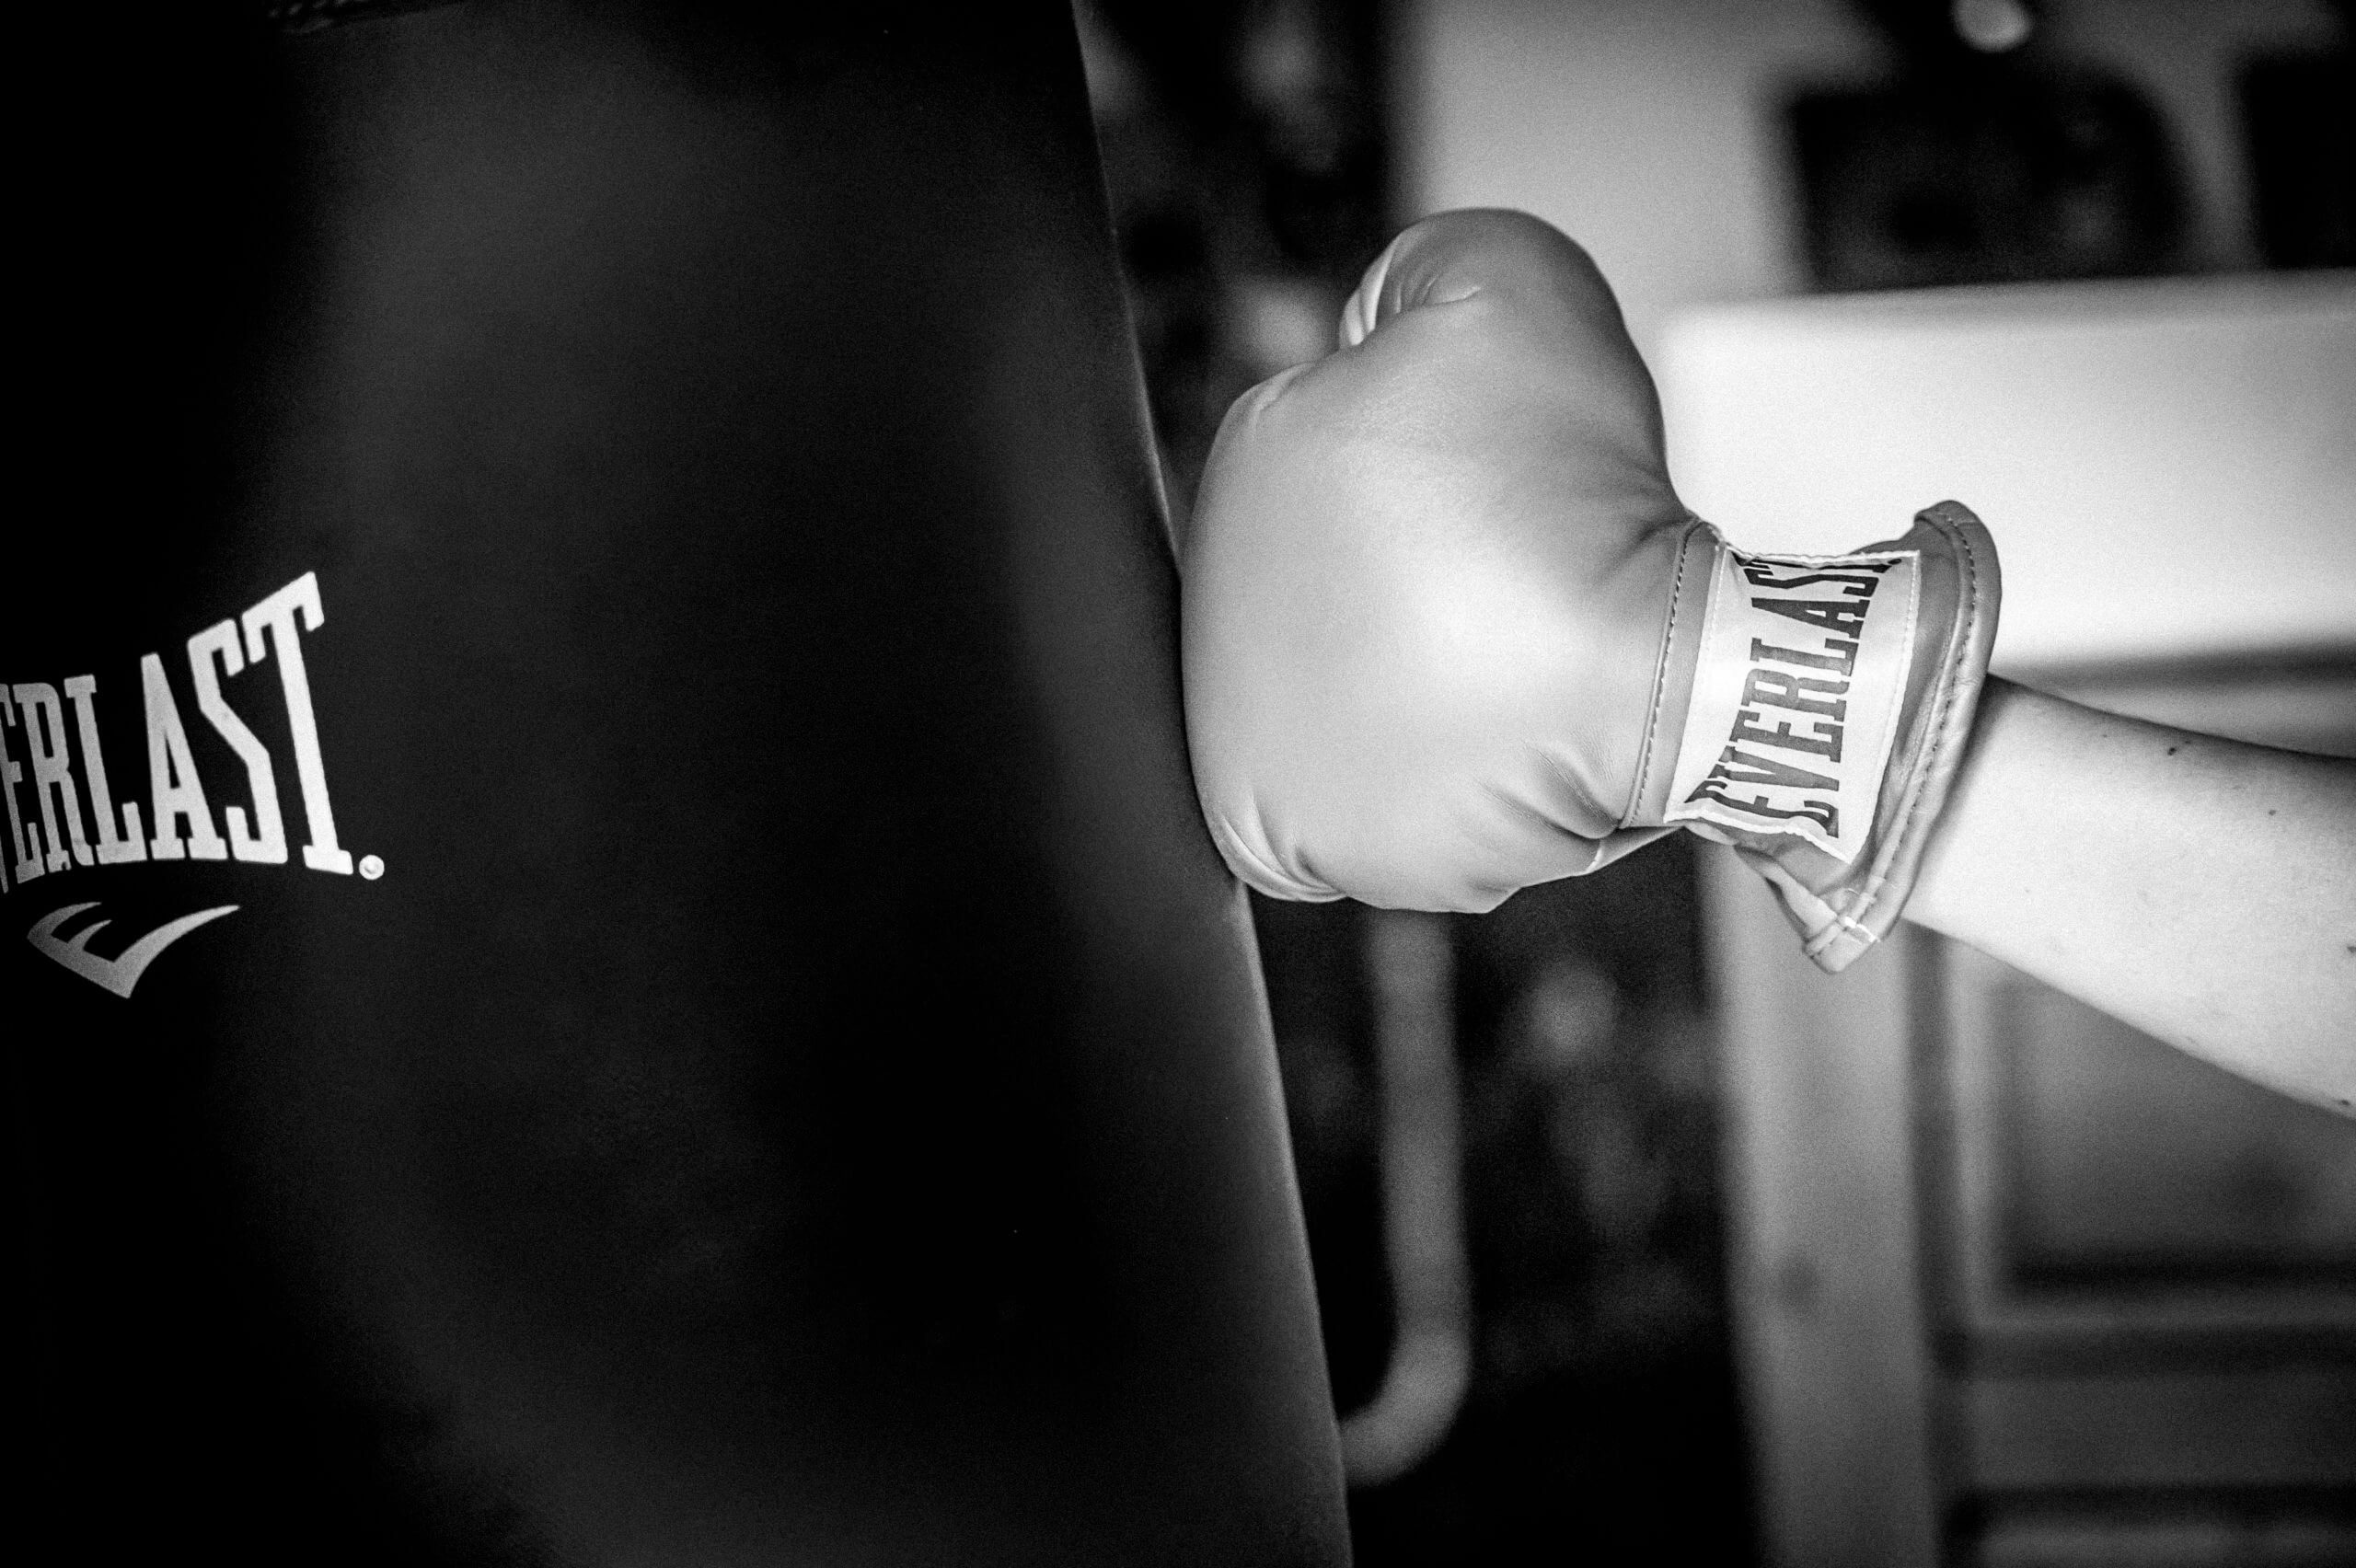 A person's fist wearing an Everlast boxing glove punches a bag.